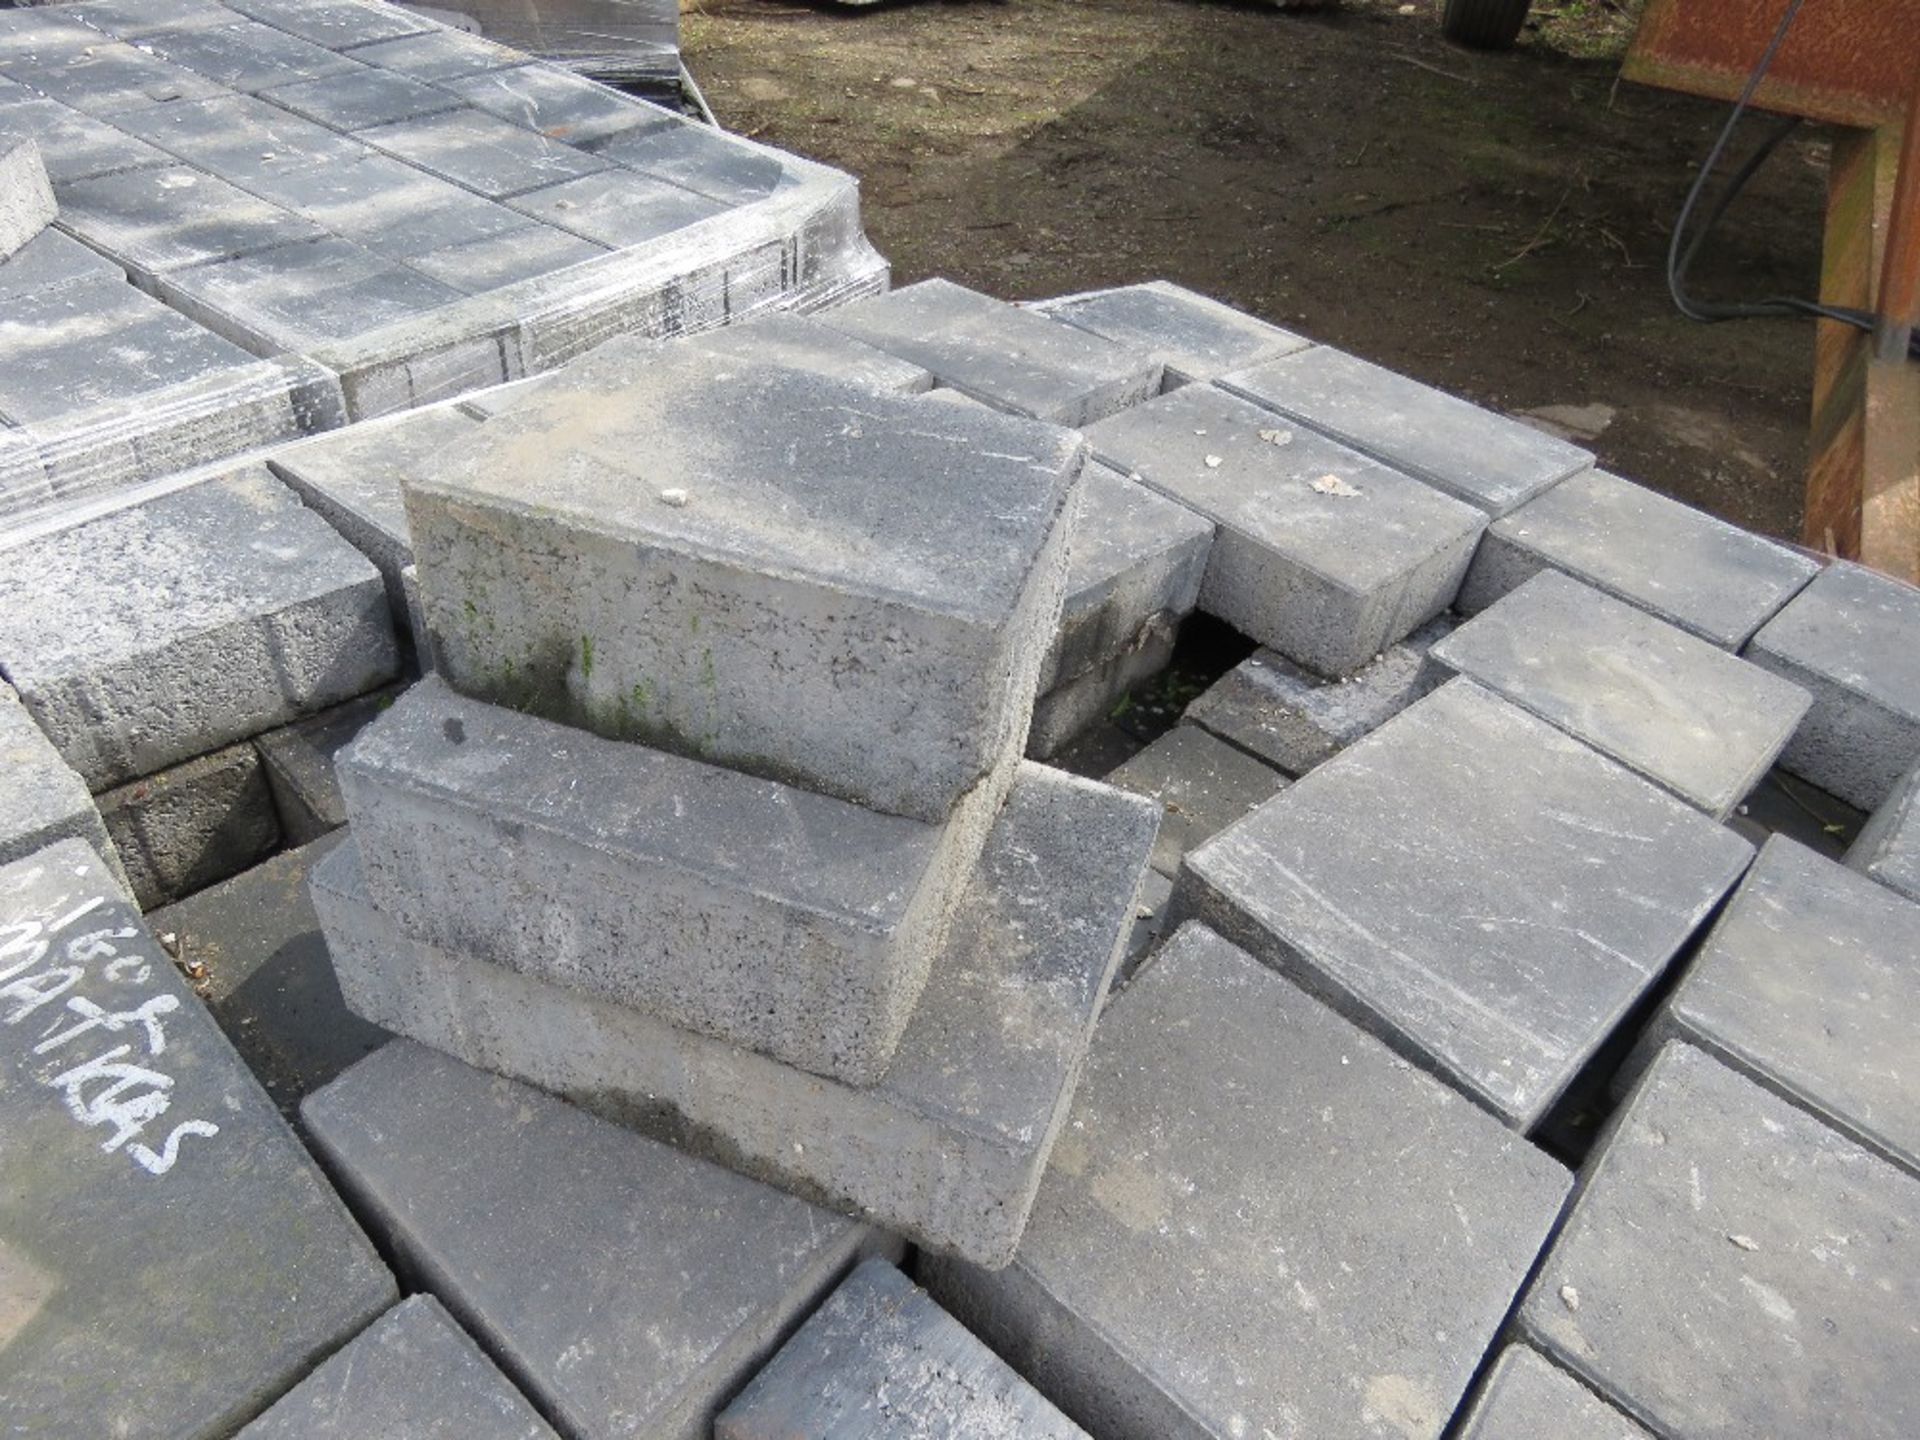 2 X PALLETS OF BLOCK PAVERS, BLACK COLOURED. - Image 6 of 7